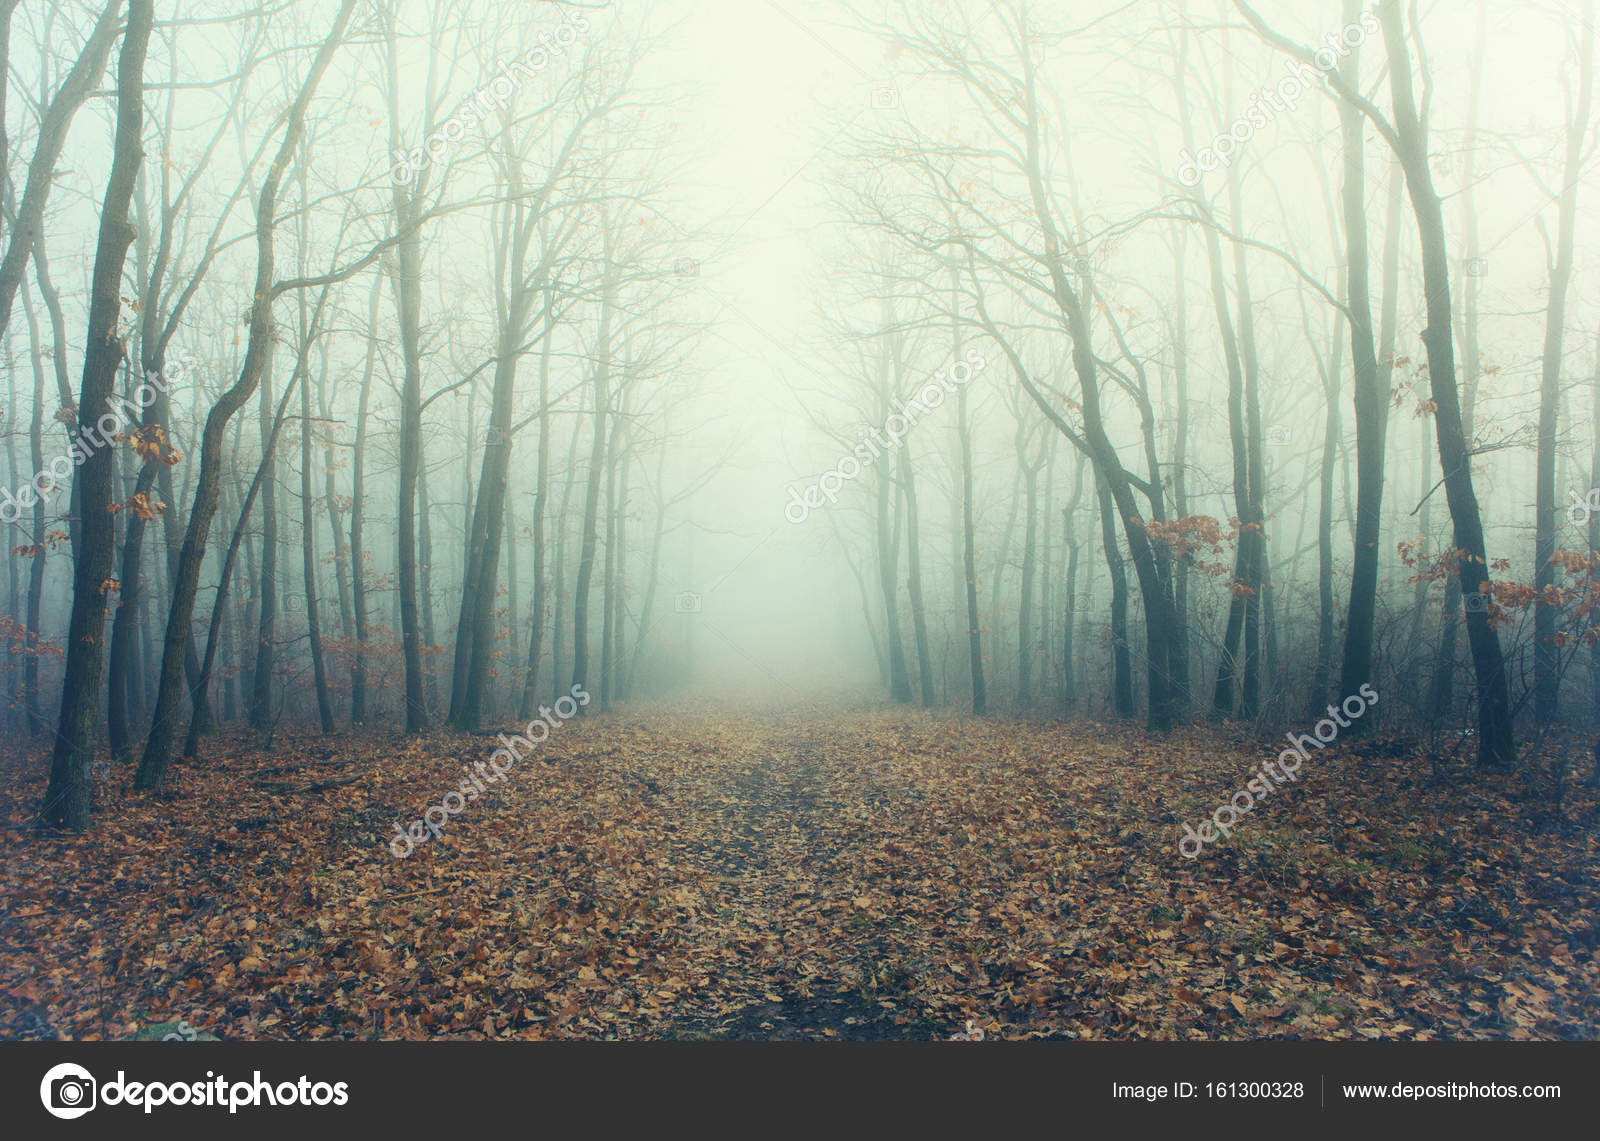 Artistic Photo Of A Mysterious Forest In Fog Stock Photo Image By C Andras Csontos